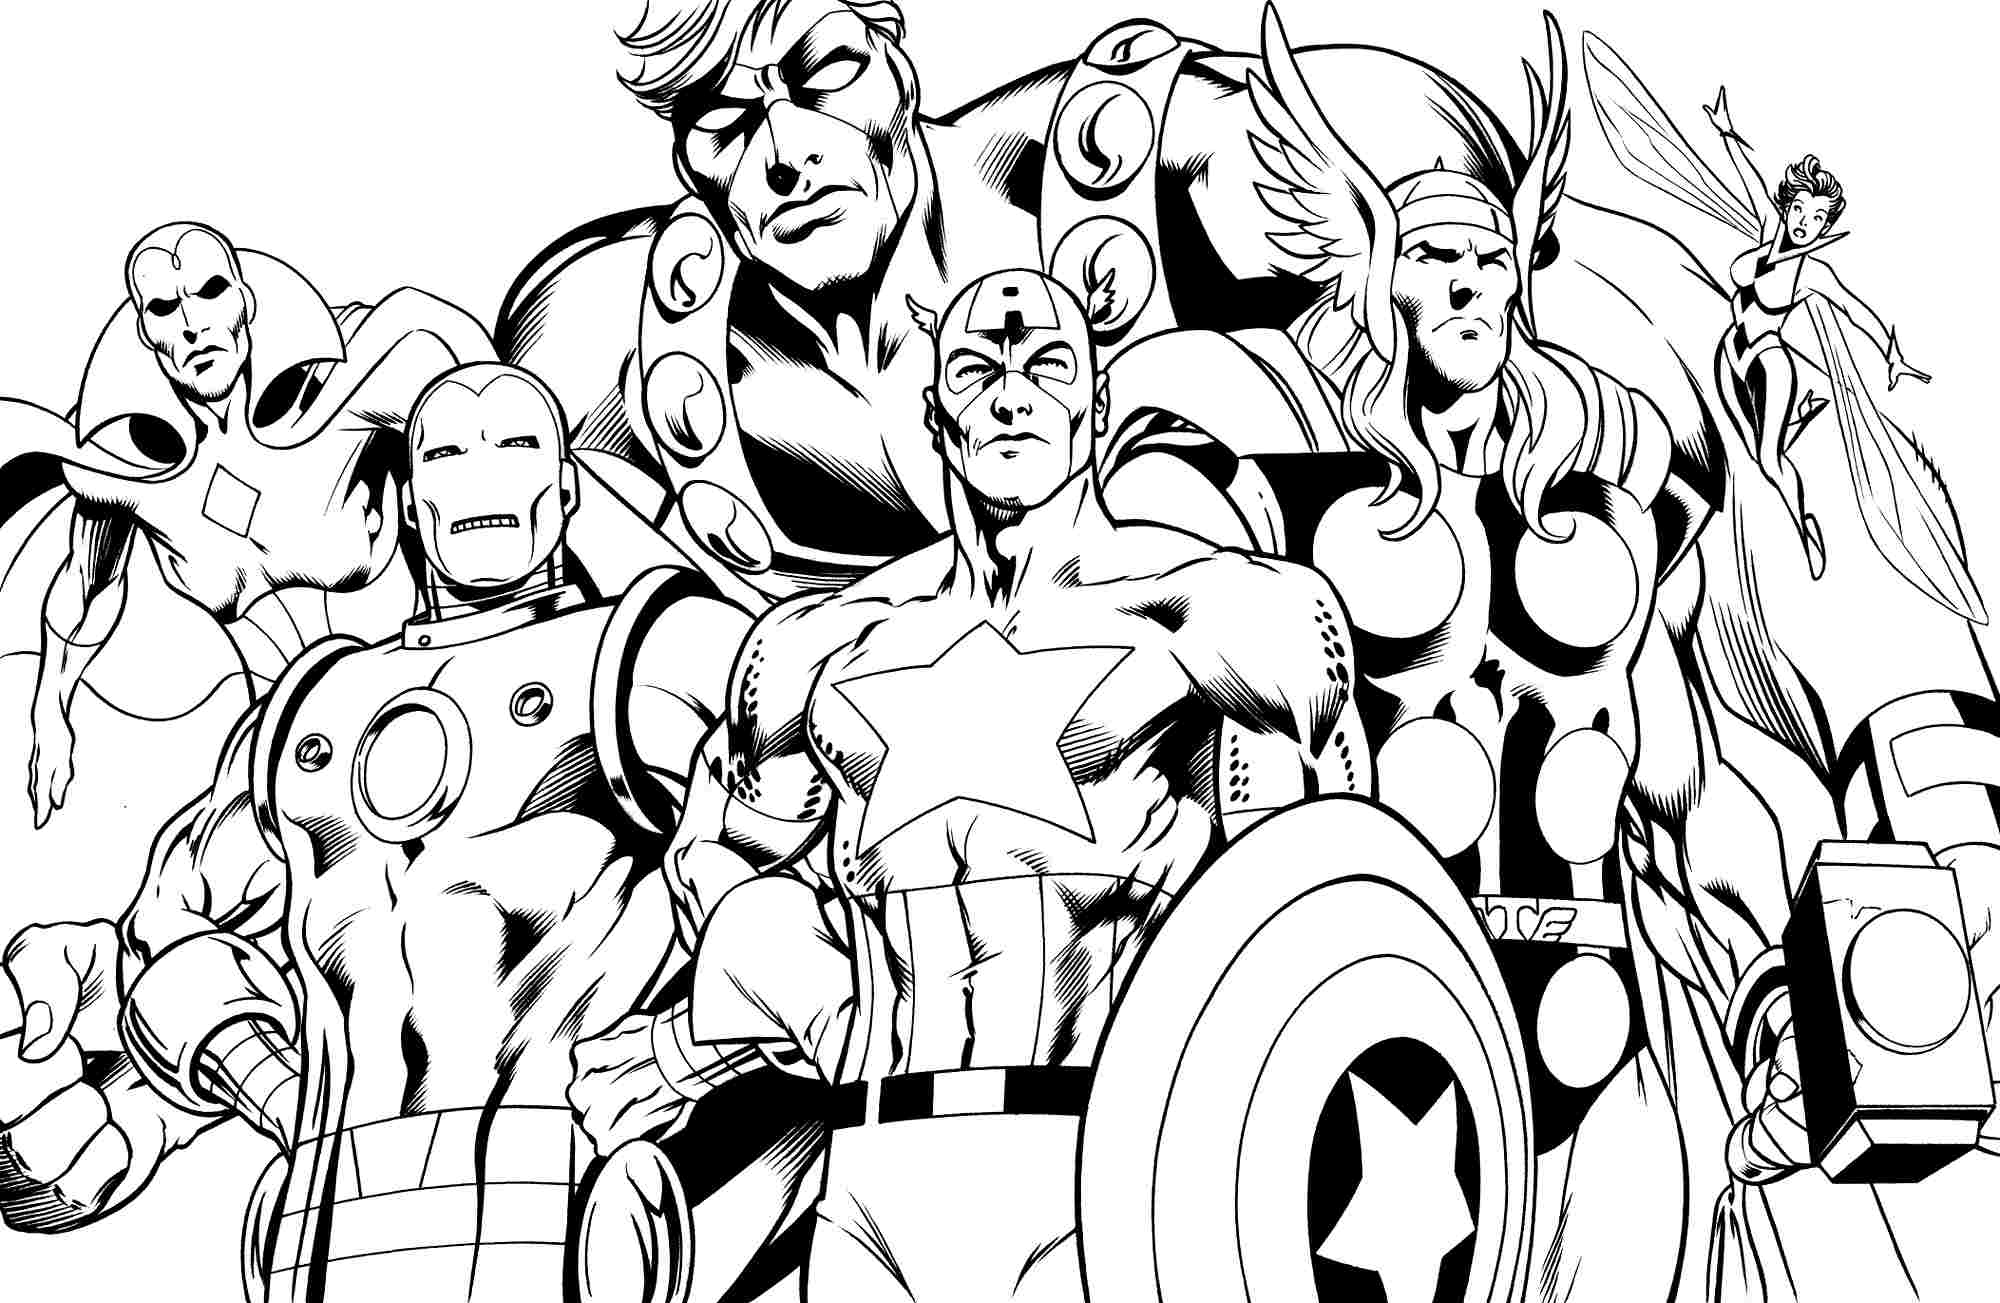 Avenger Coloring Pages To Print - Coloring Pages For All Ages